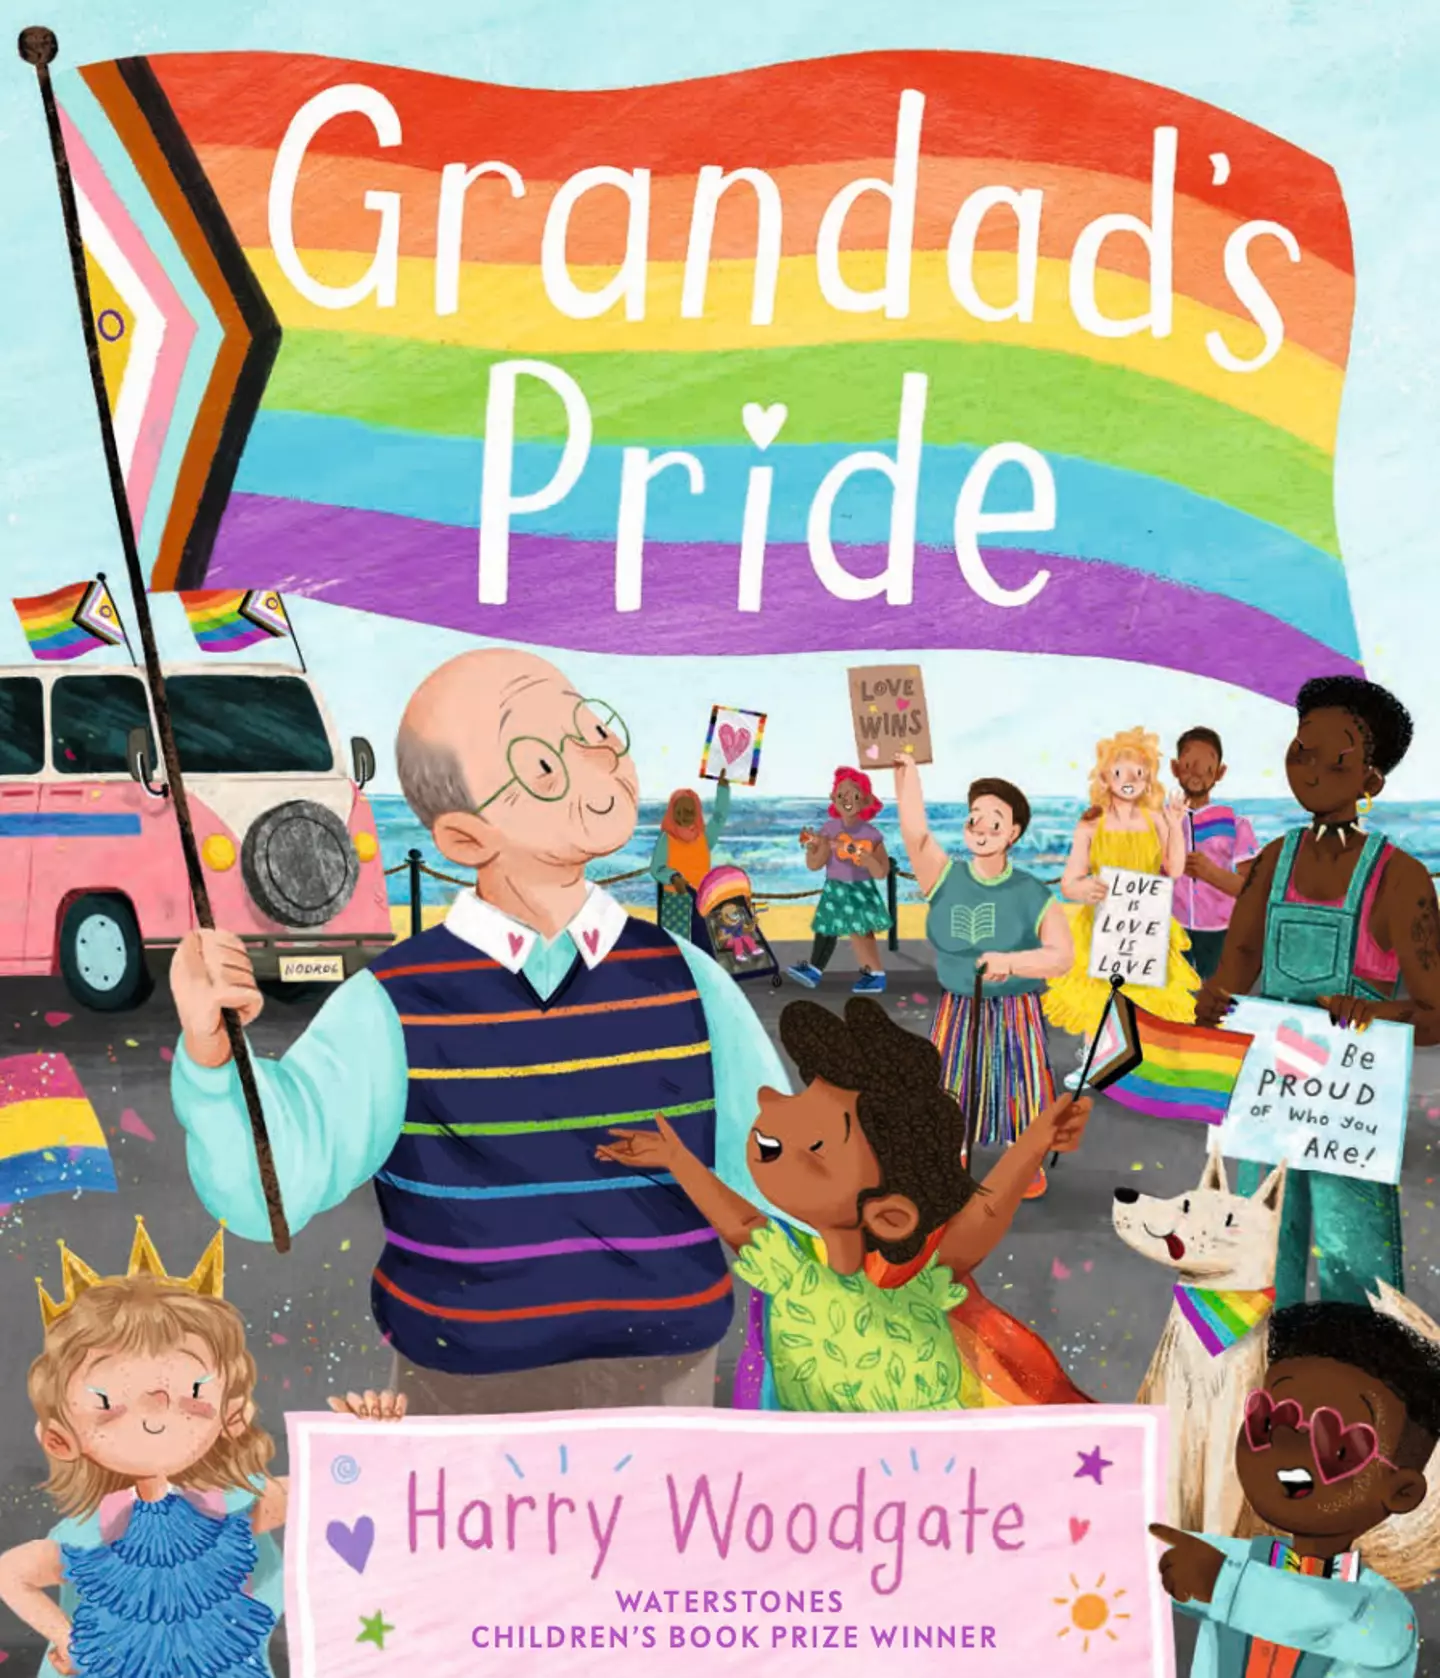 The book Grandad's Pride contained an image that some parents considered to be 'erotic'.